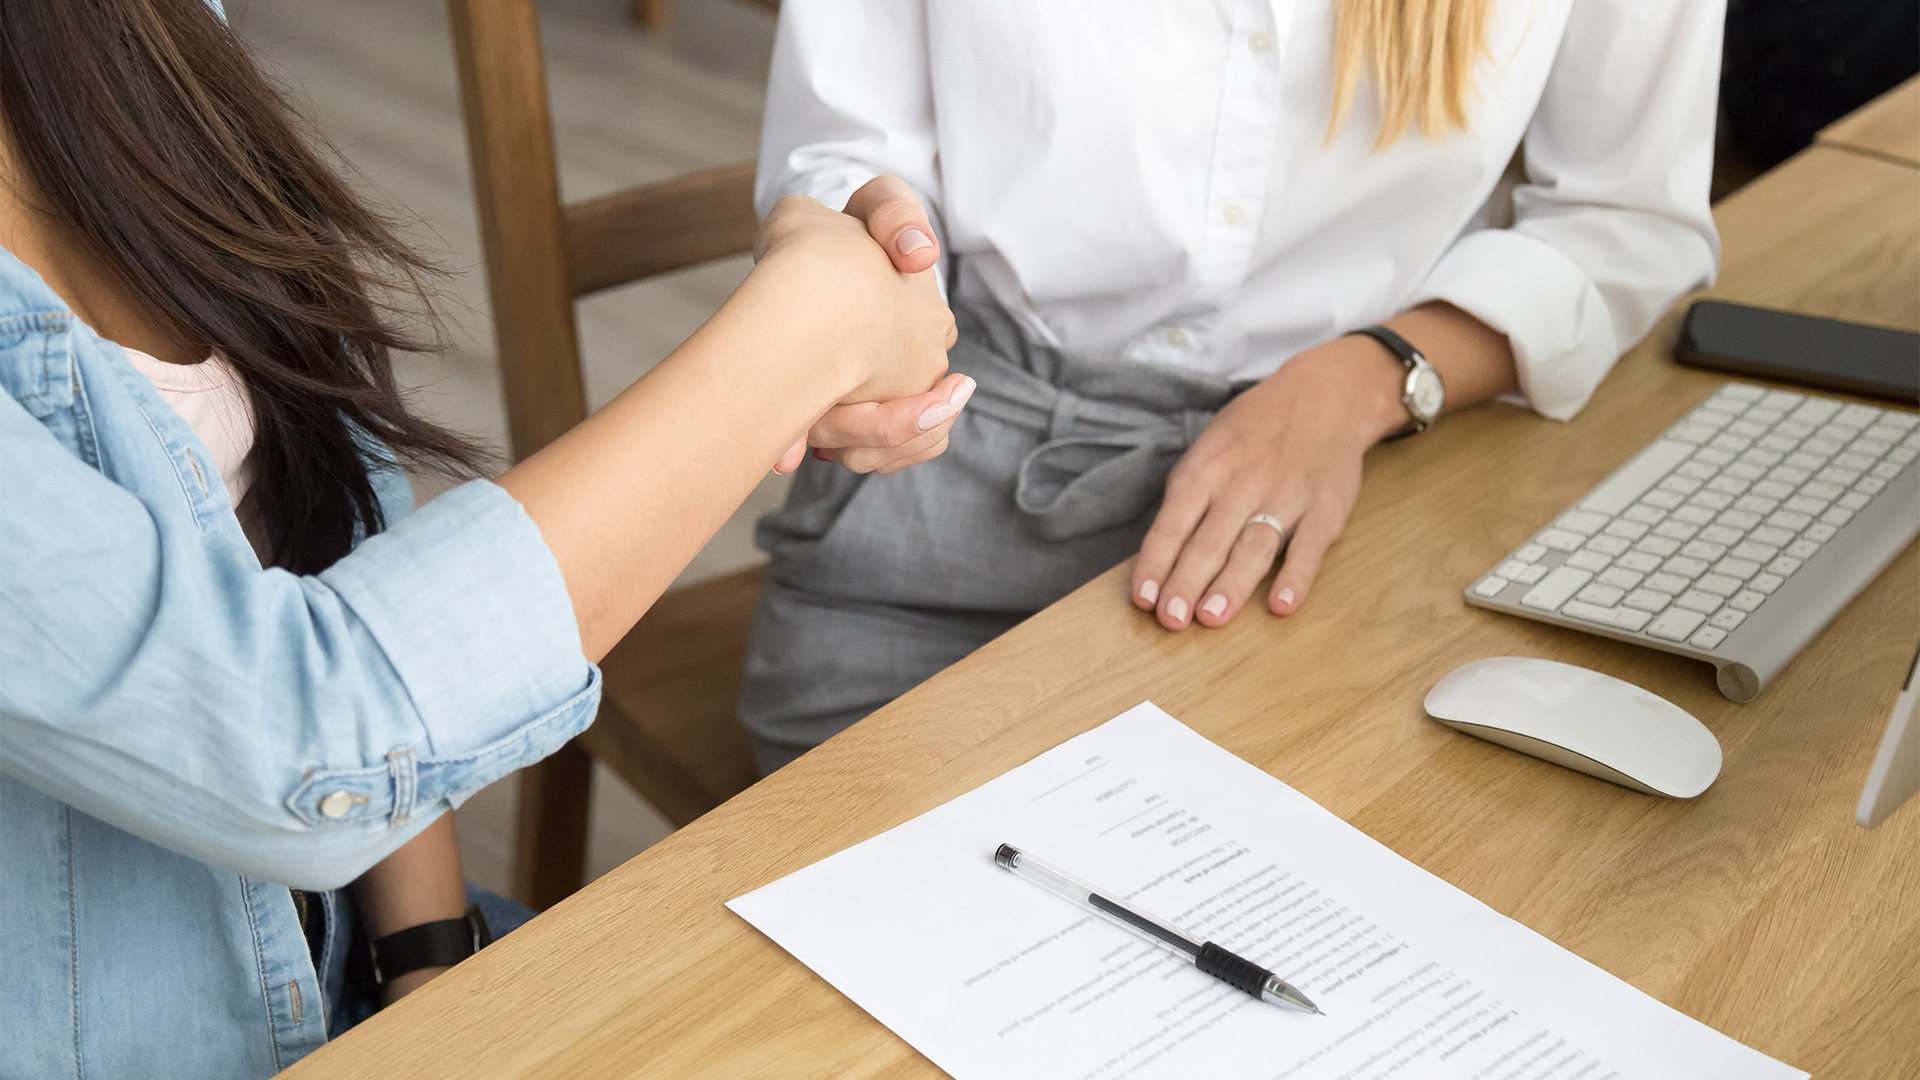 Two women partners handshaking after signing business contract at meeting, female client or customer and manager agent broker closing good deal, female hands shaking making agreement, close up view